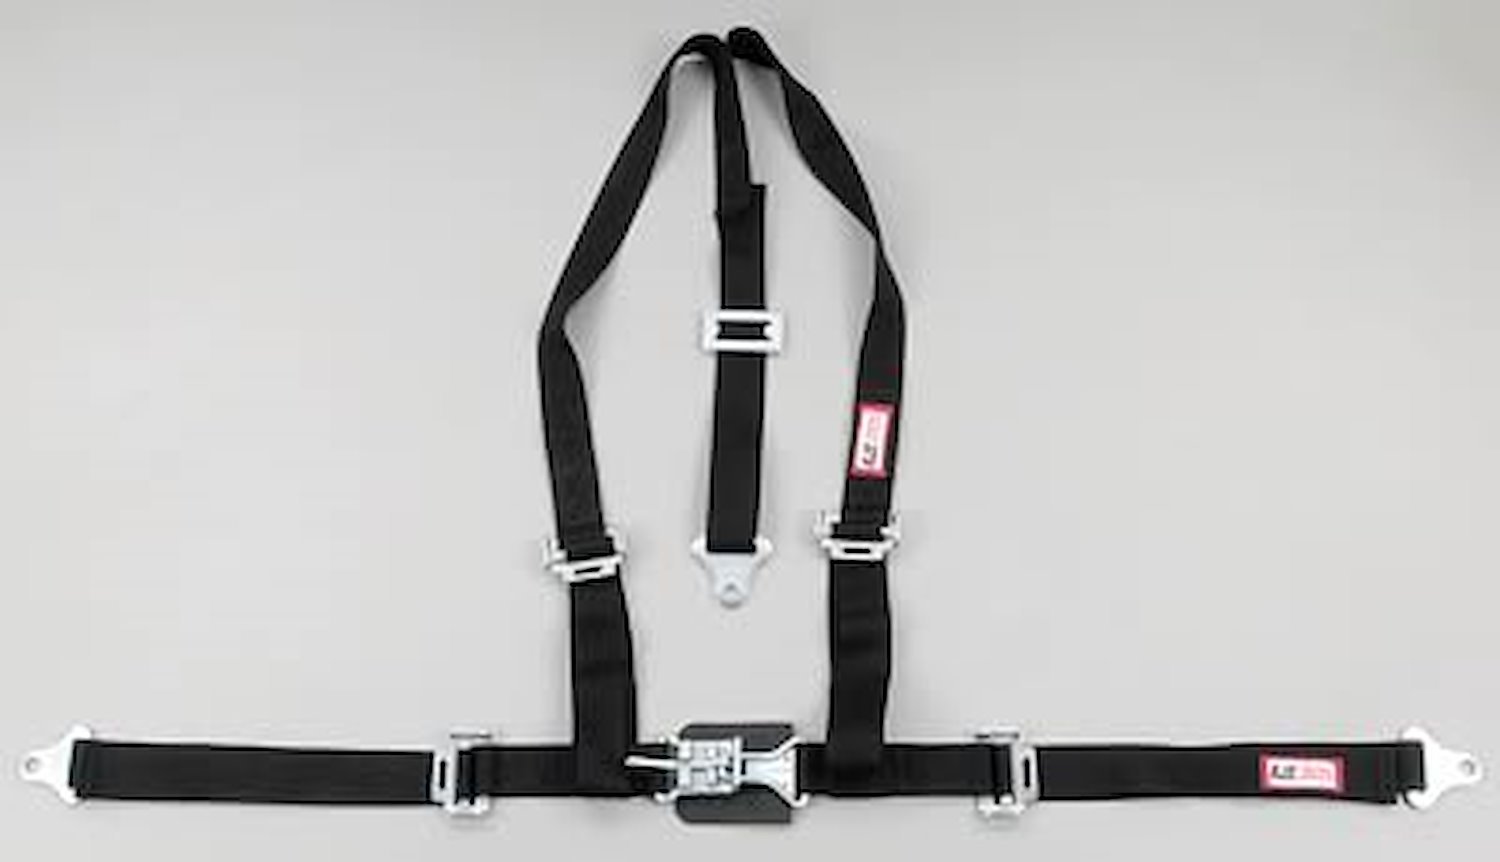 NON-SFI L&L HARNESS 3 PULL DOWN Lap BELT SNAP SEWN IN 2 S.H. Y FLOOR Mount WRAP/SNAP GRAY